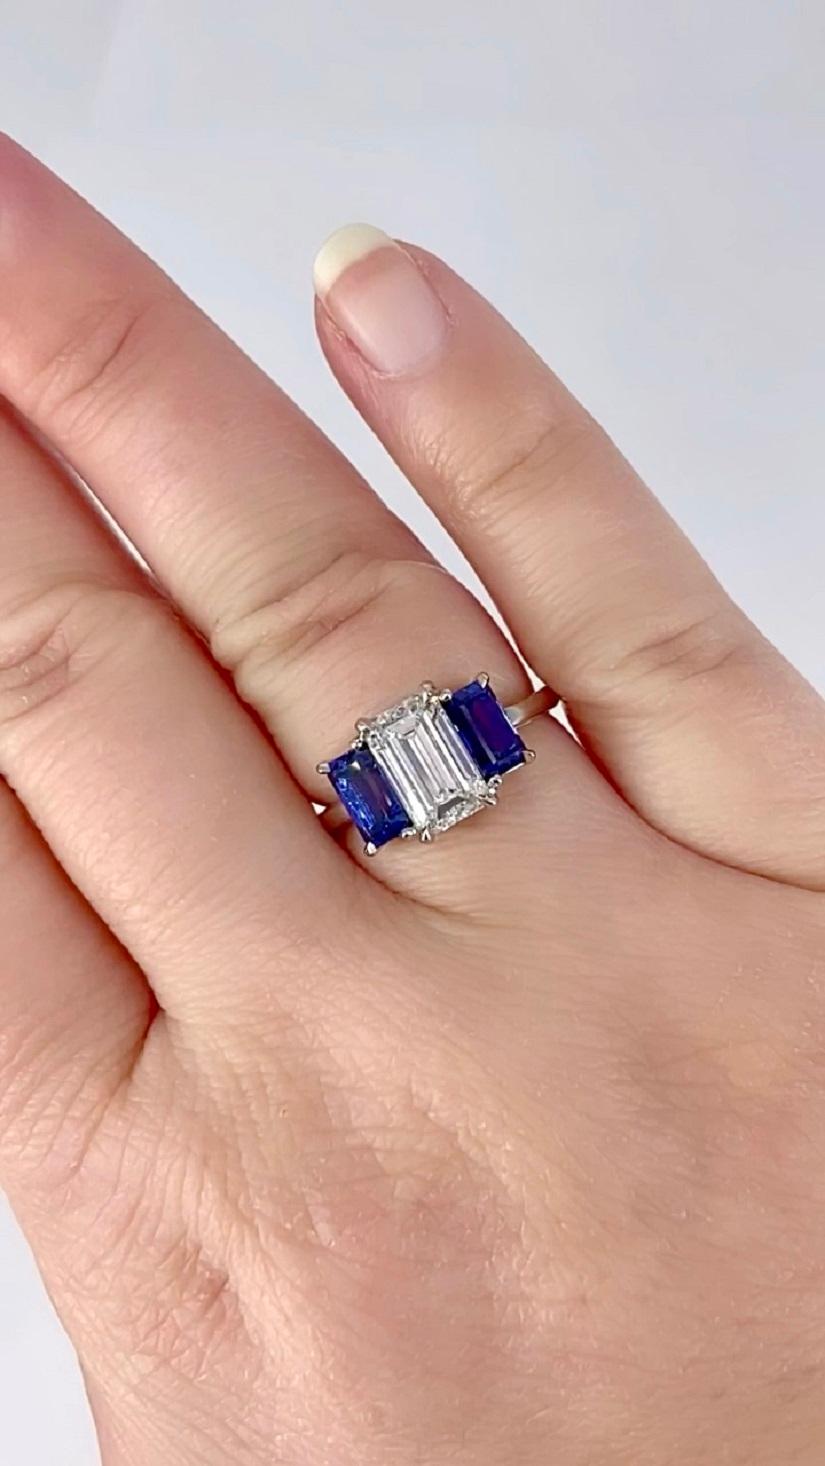 Cartier 1.55 carat GIA FVVS1 Emerald Cut Diamond Three Stone Ring with Sapphires For Sale 1